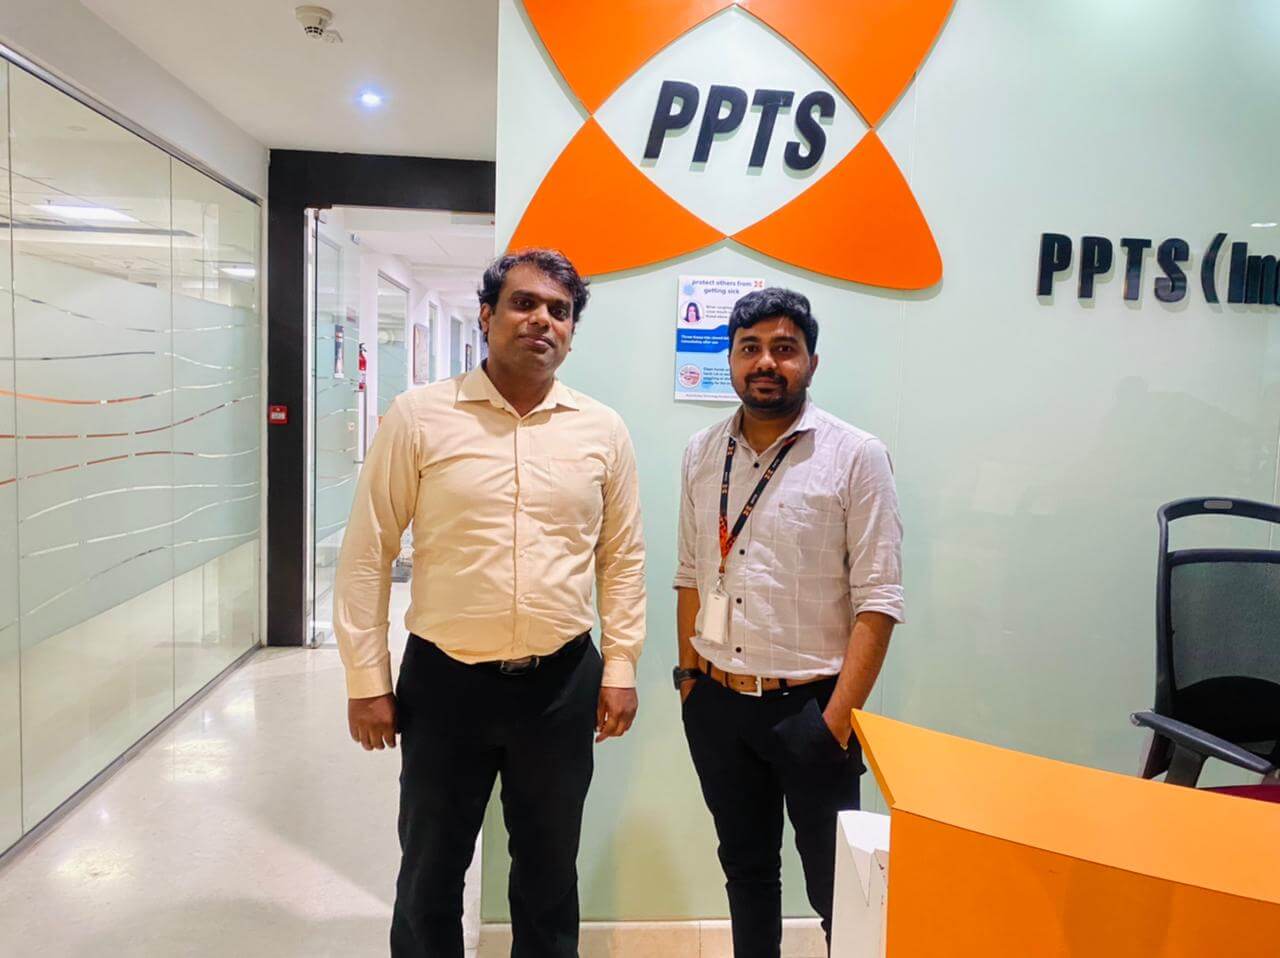 Aditya-institute-of-technology-placement-officer -visited-PPTS-office-at-1-dec-2021